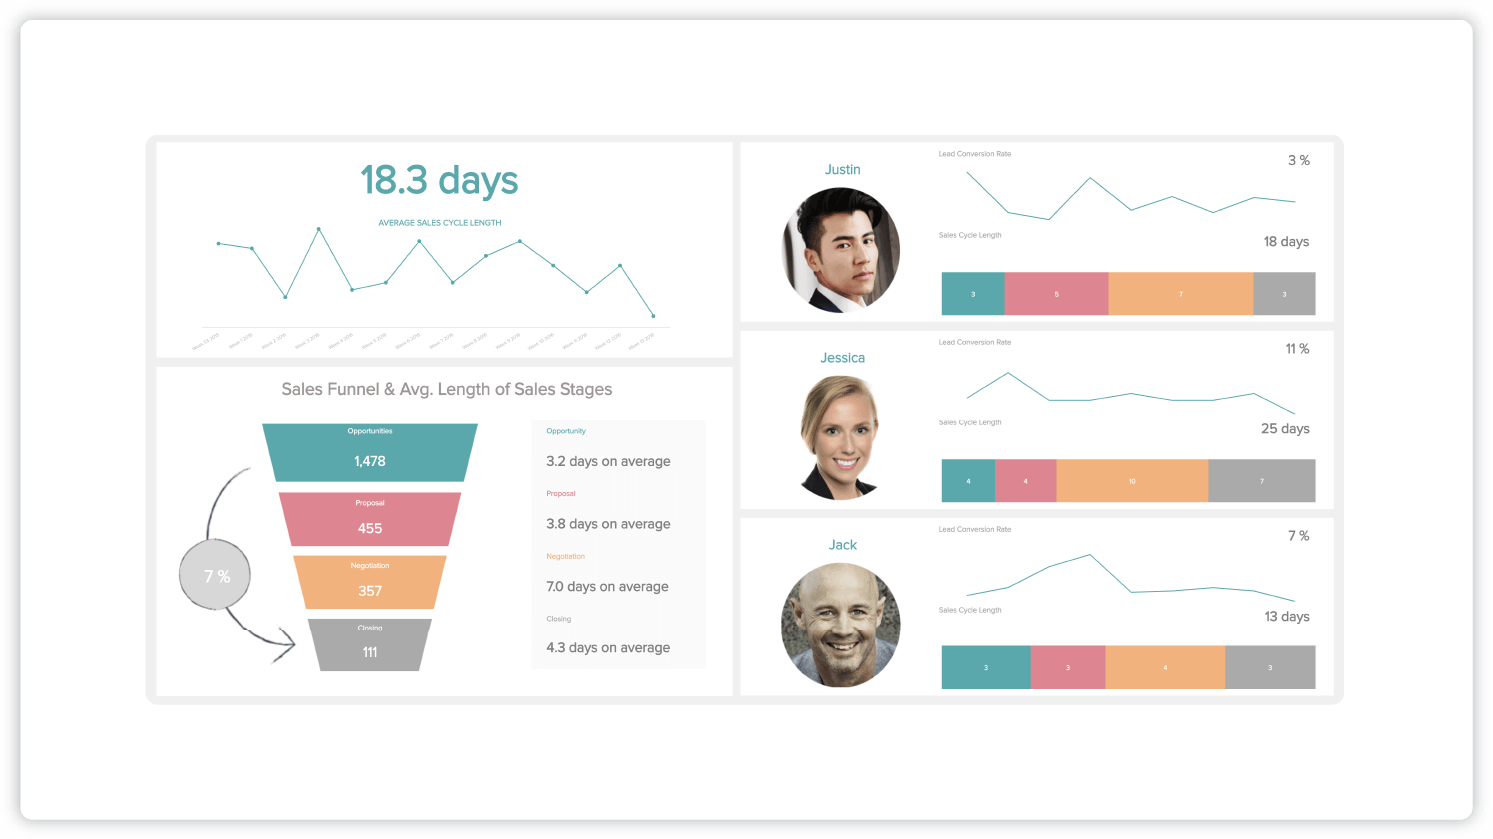 Sales cycle length dashboard showing the average length of top-funnel, mid-funnel, bottom-funnel, and closing sales stages. Each employee has their own graph and metrics. 